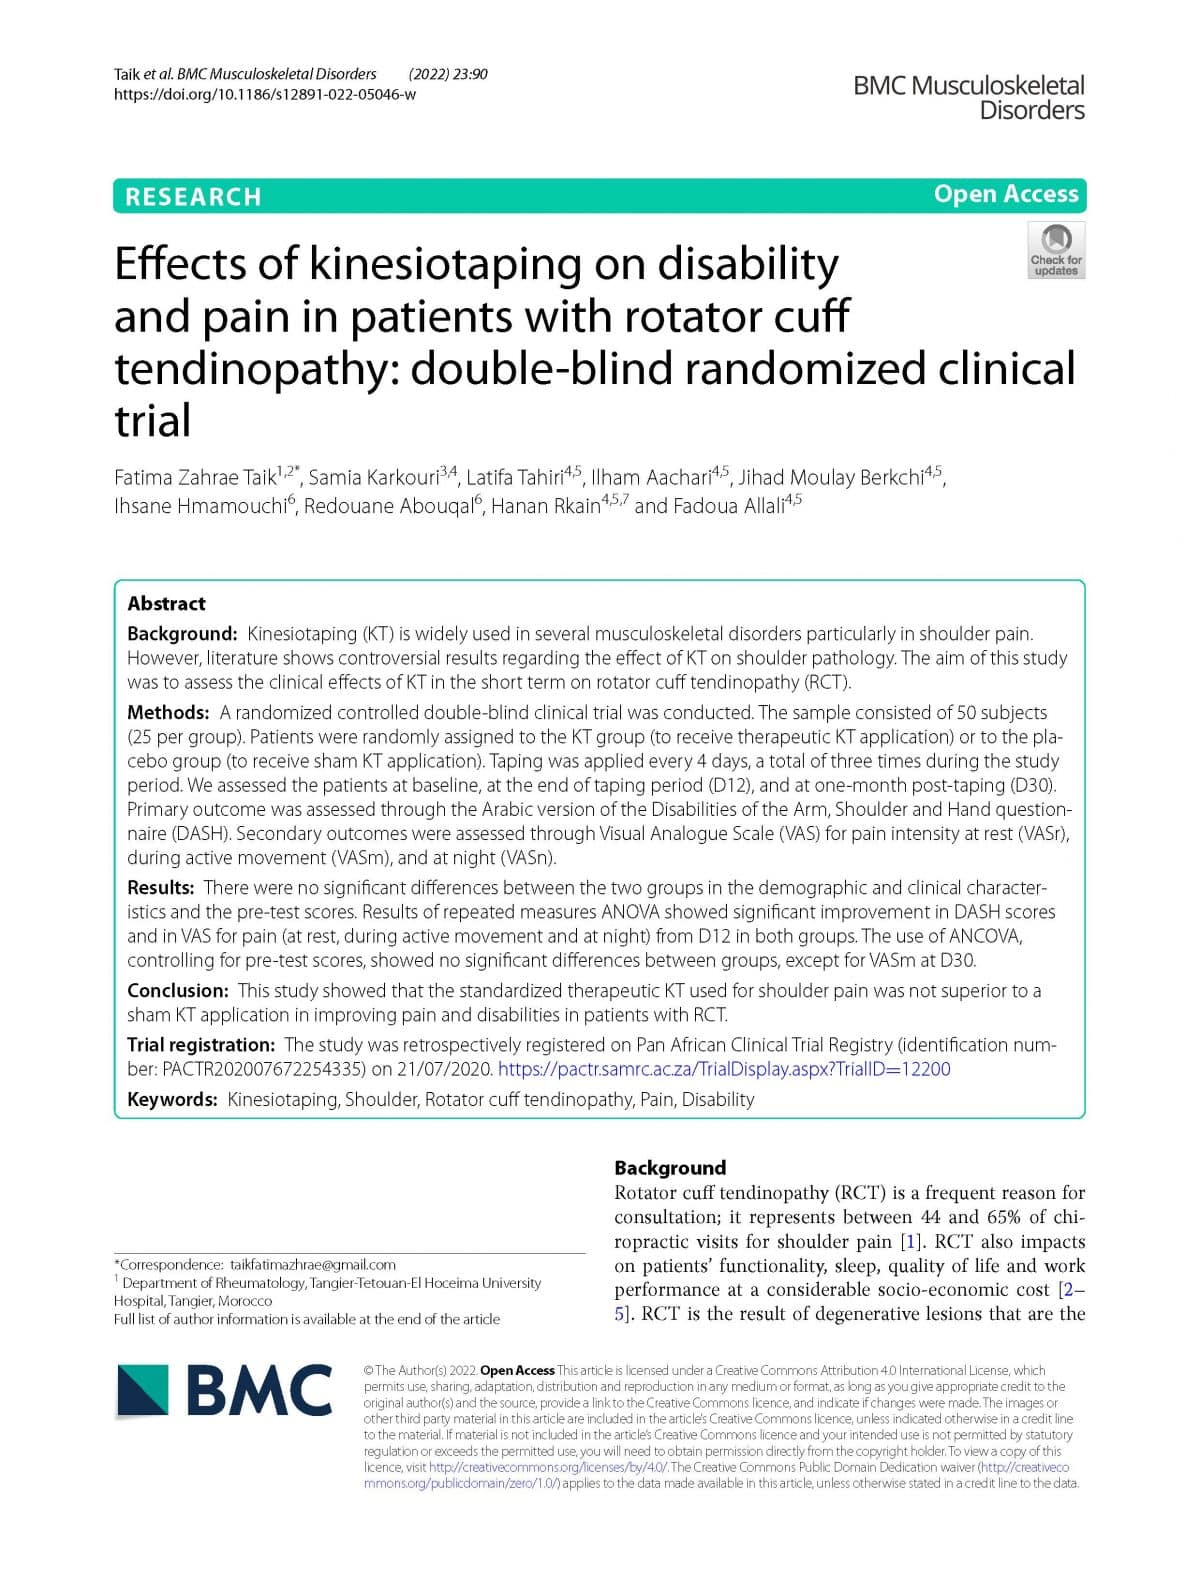 Research Article- Effects of kinesiotaping on disability and pain in patients with rotator cuff tendinopathy: double-blind randomized clinical trial